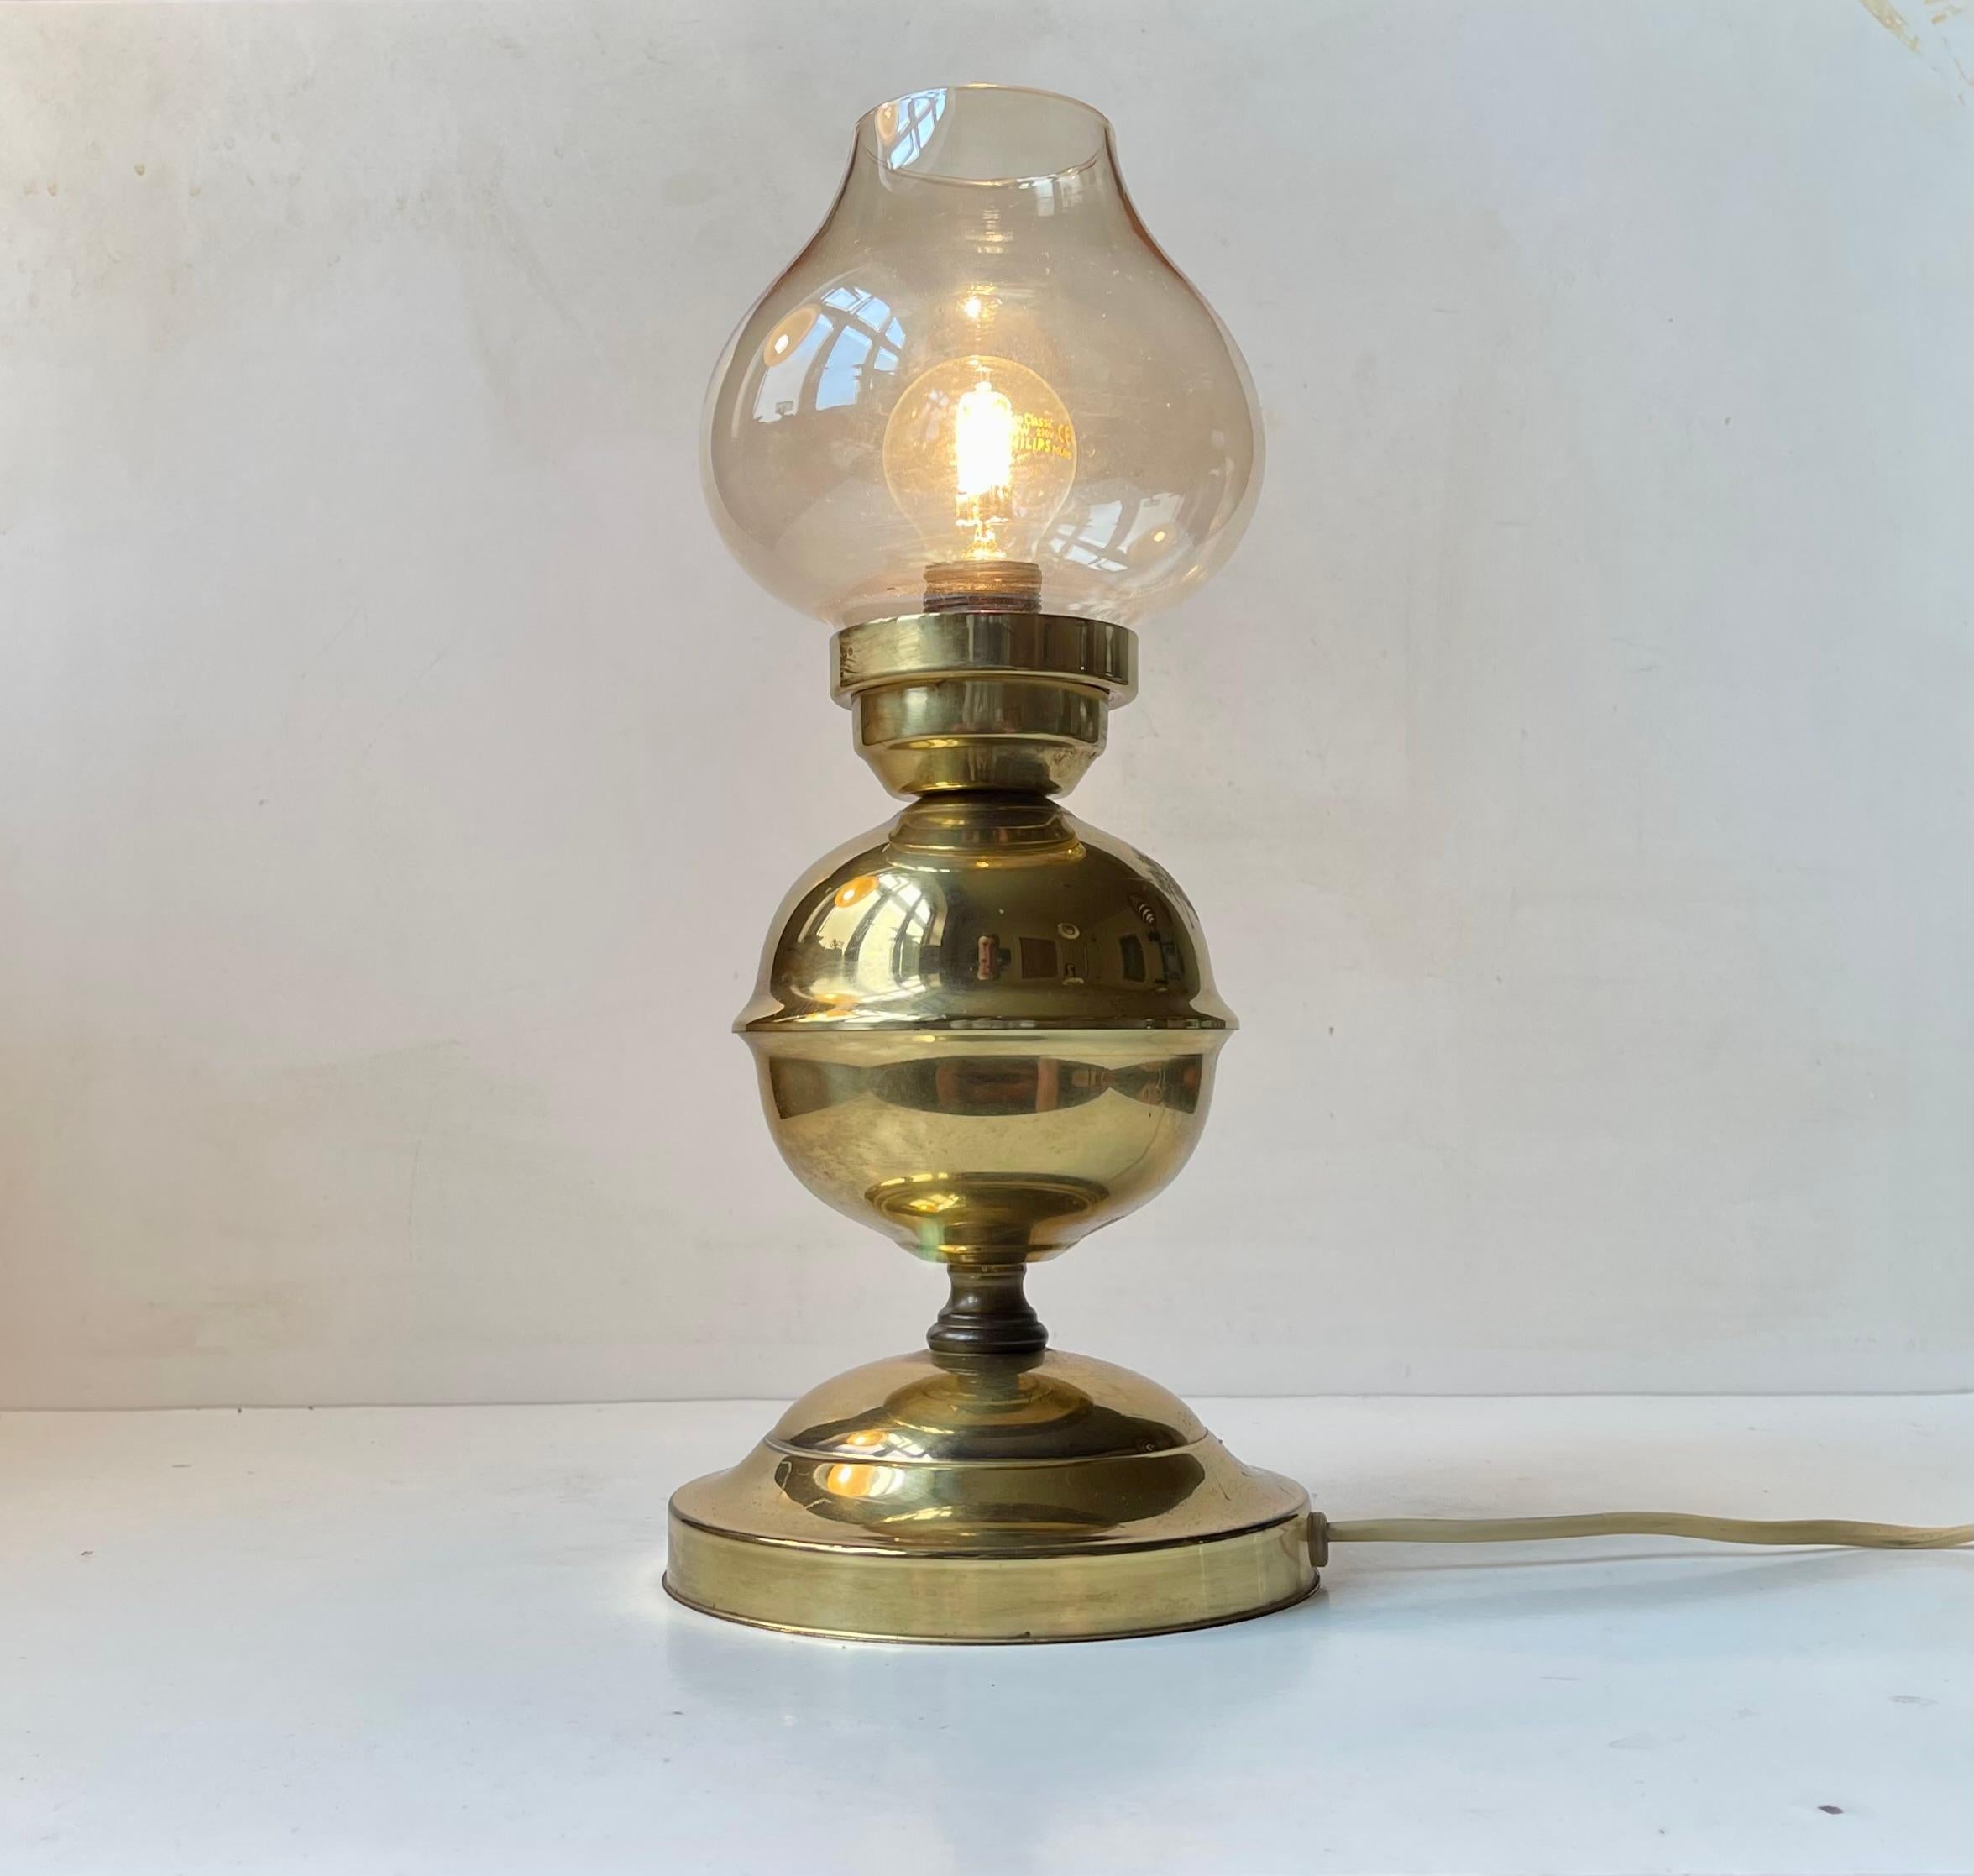 A nautical table lamp executed in solid brass and featuring a smoke glass shade.The on/off switch is at its cord. It was made by ABO in Denmark 1970-80 in a style reminiscent of Hans Agne Jakobsson. Measurements: H: 33 cm, D: 13/15